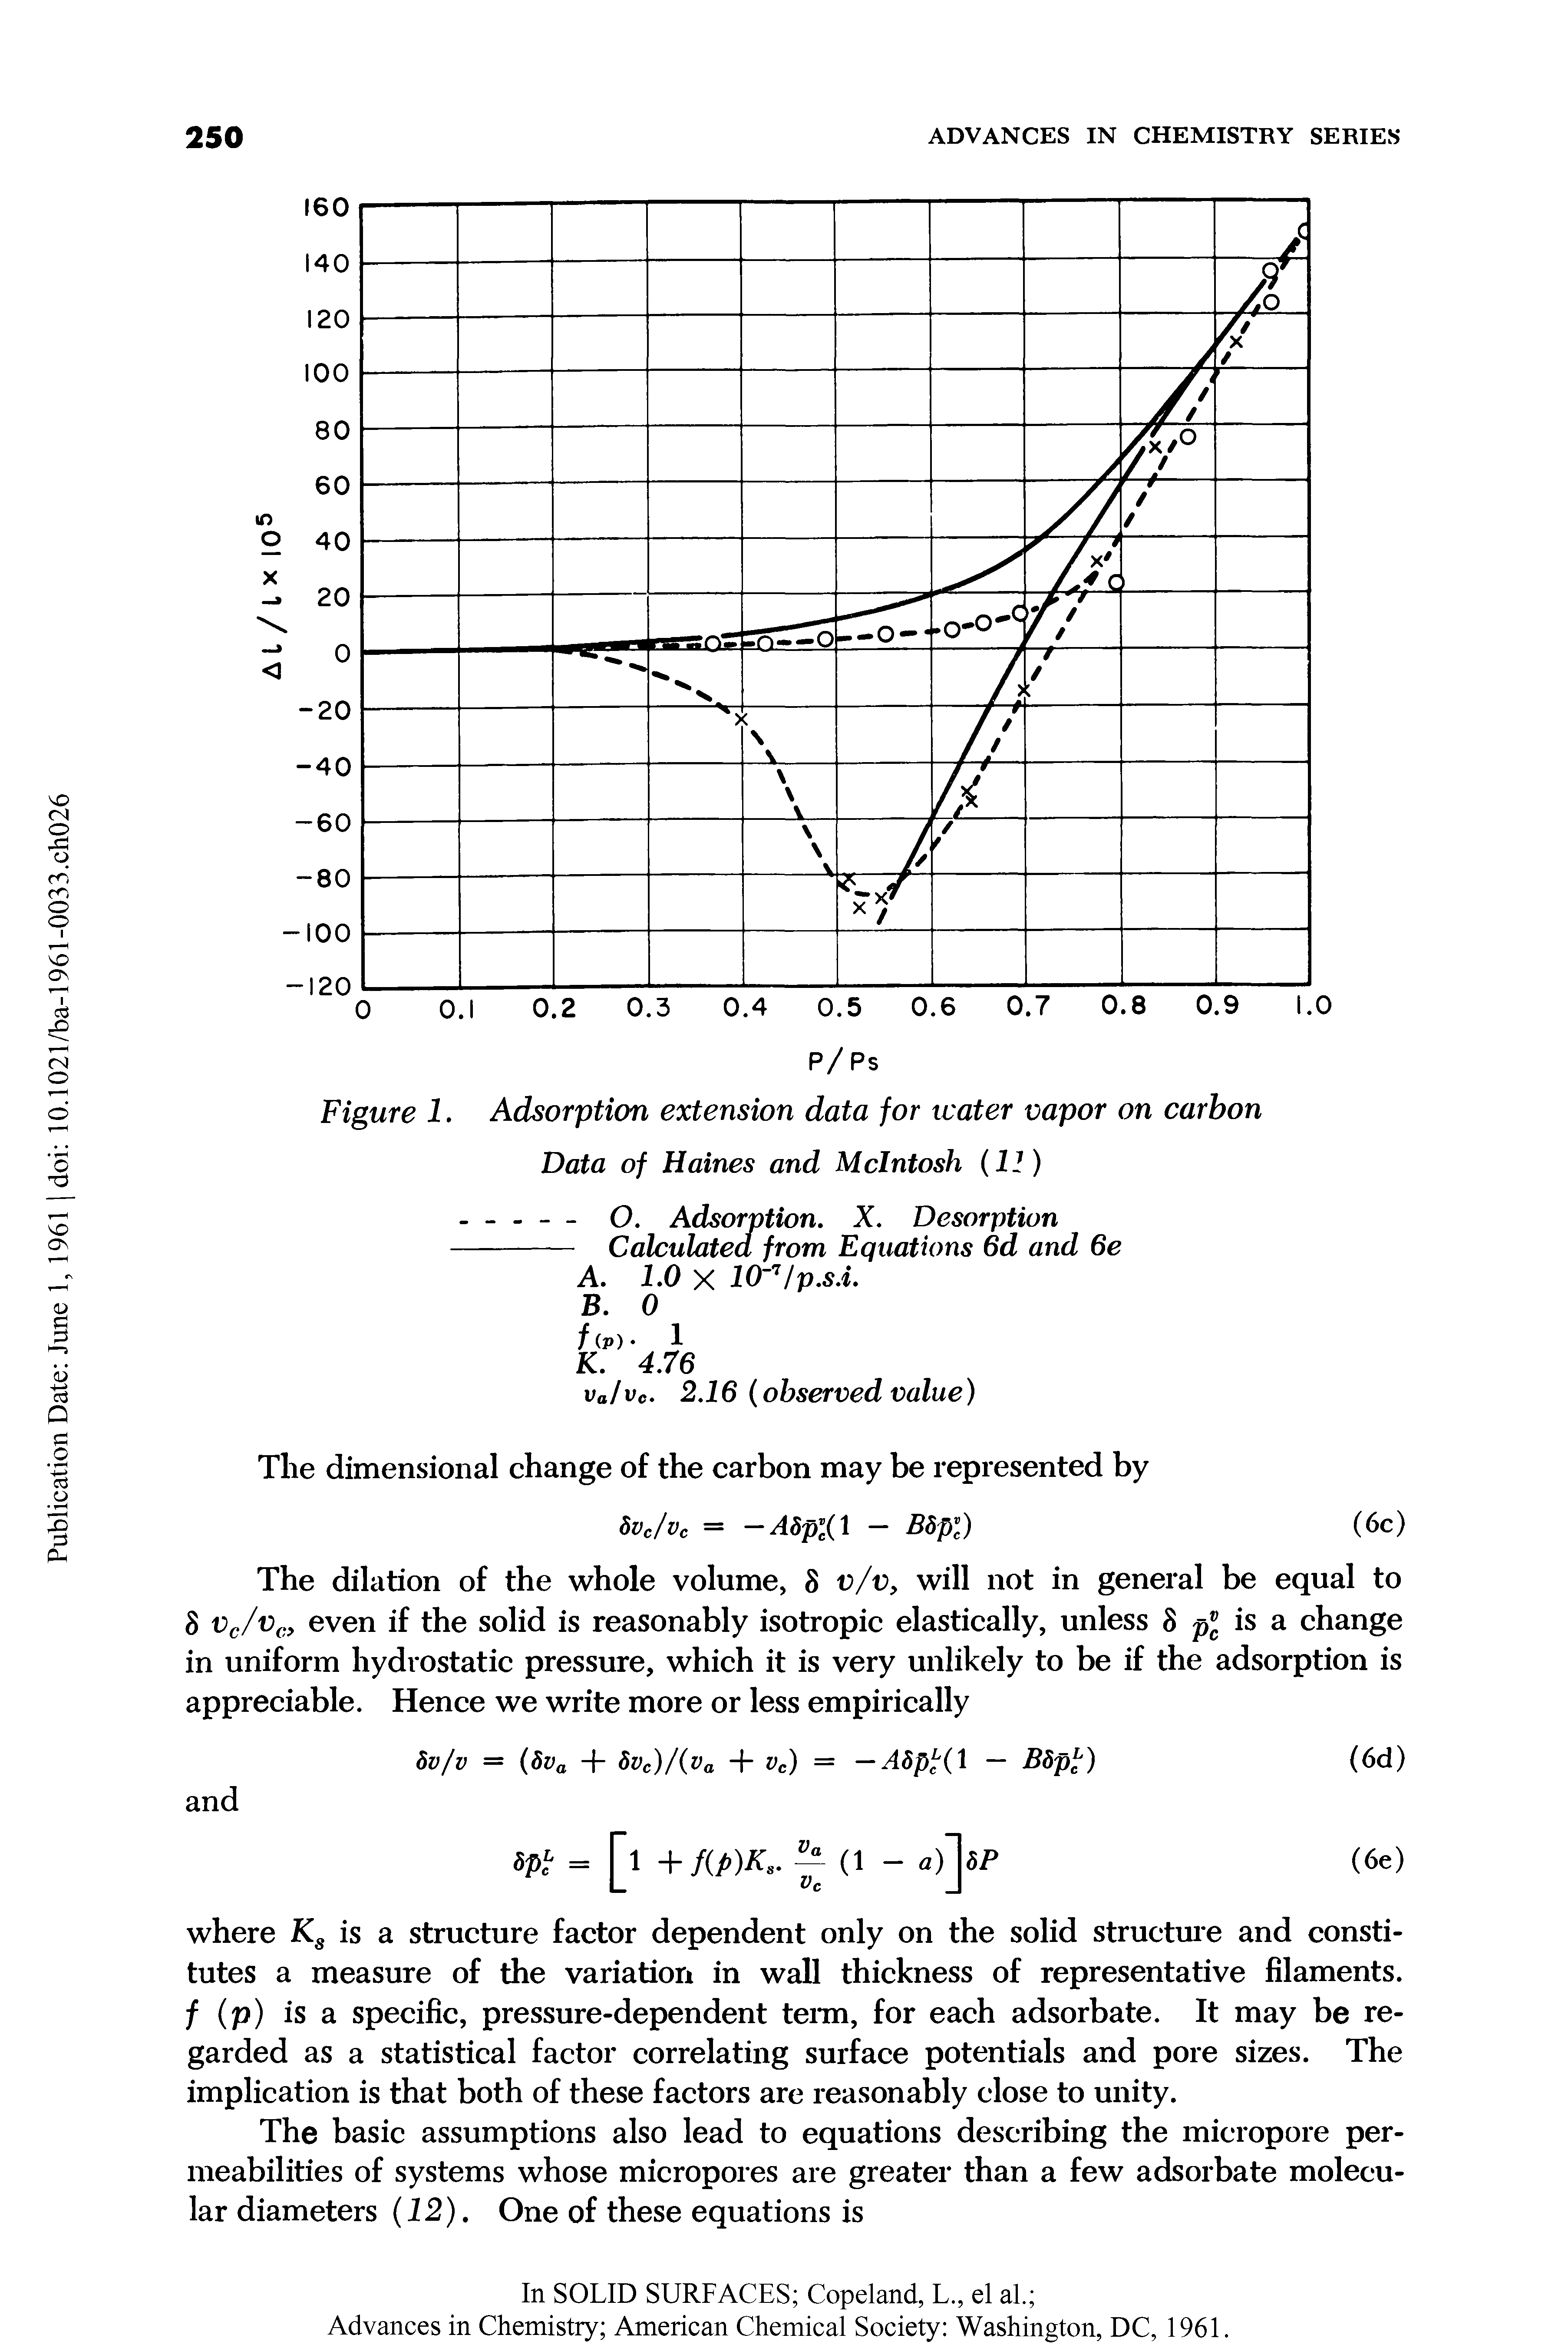 Figure 1. Adsorption extension data for water vapor on carbon...